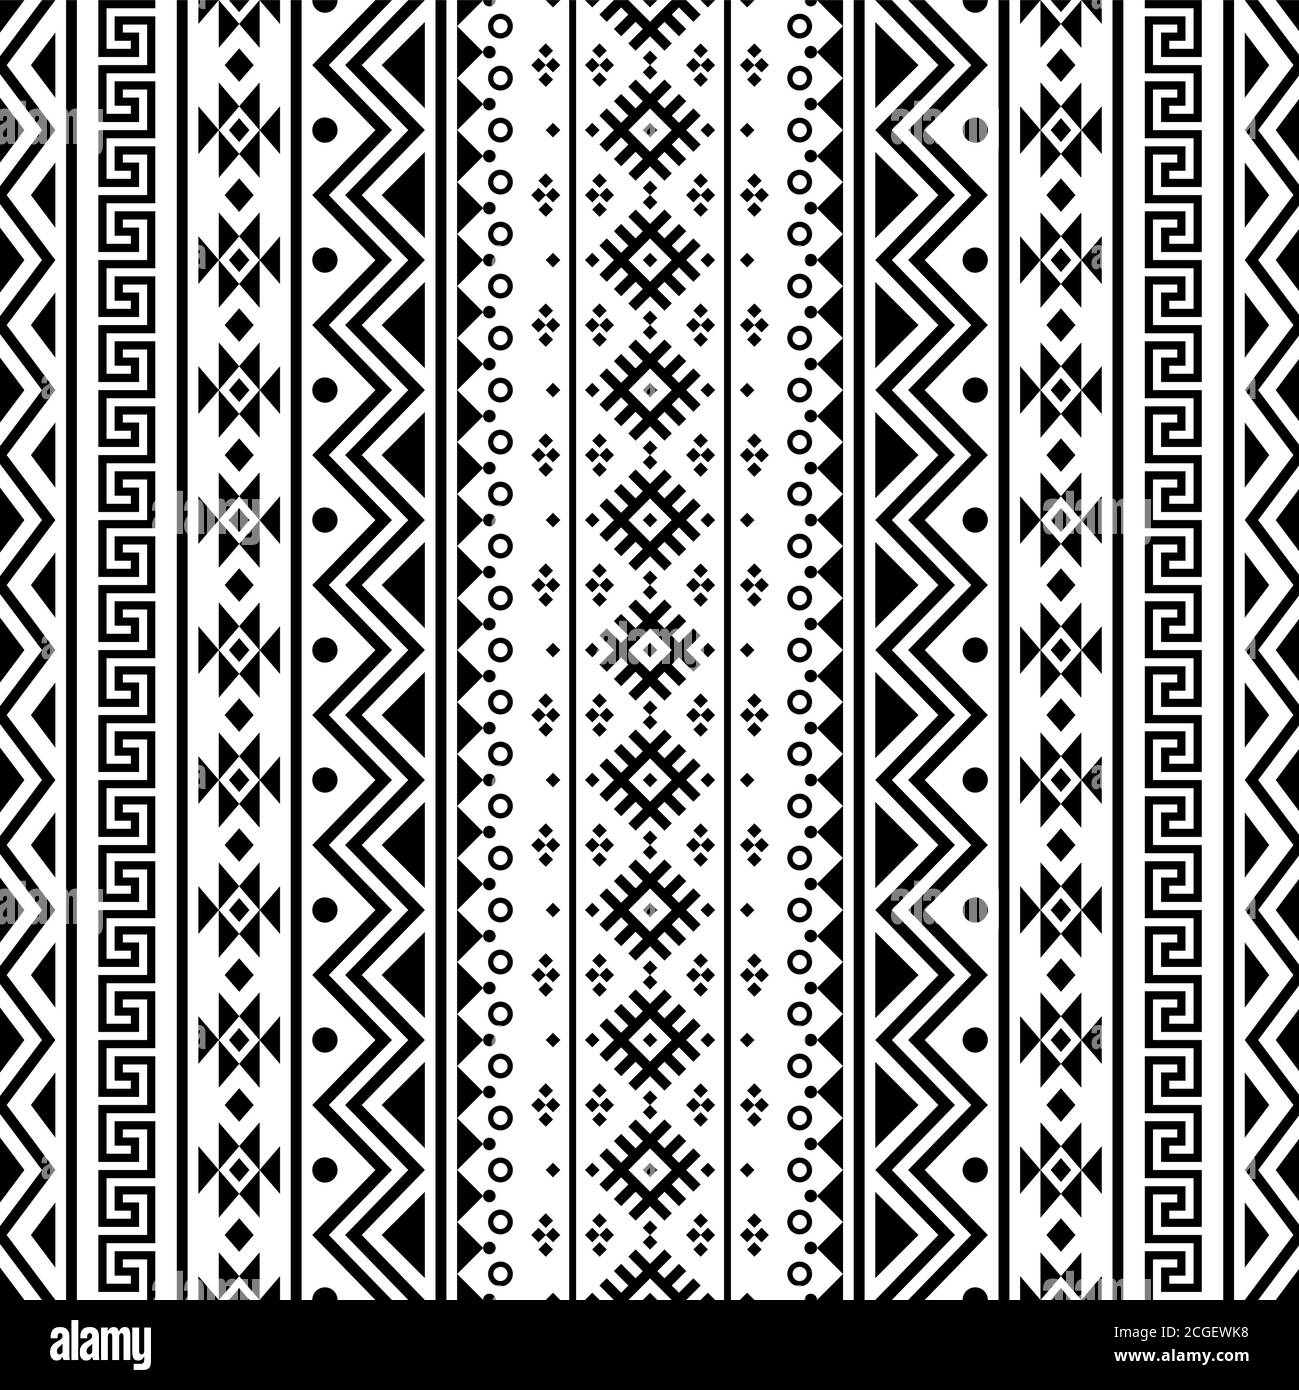 Aztec ethnic seamless pattern design in black and white color. Ethnic ...